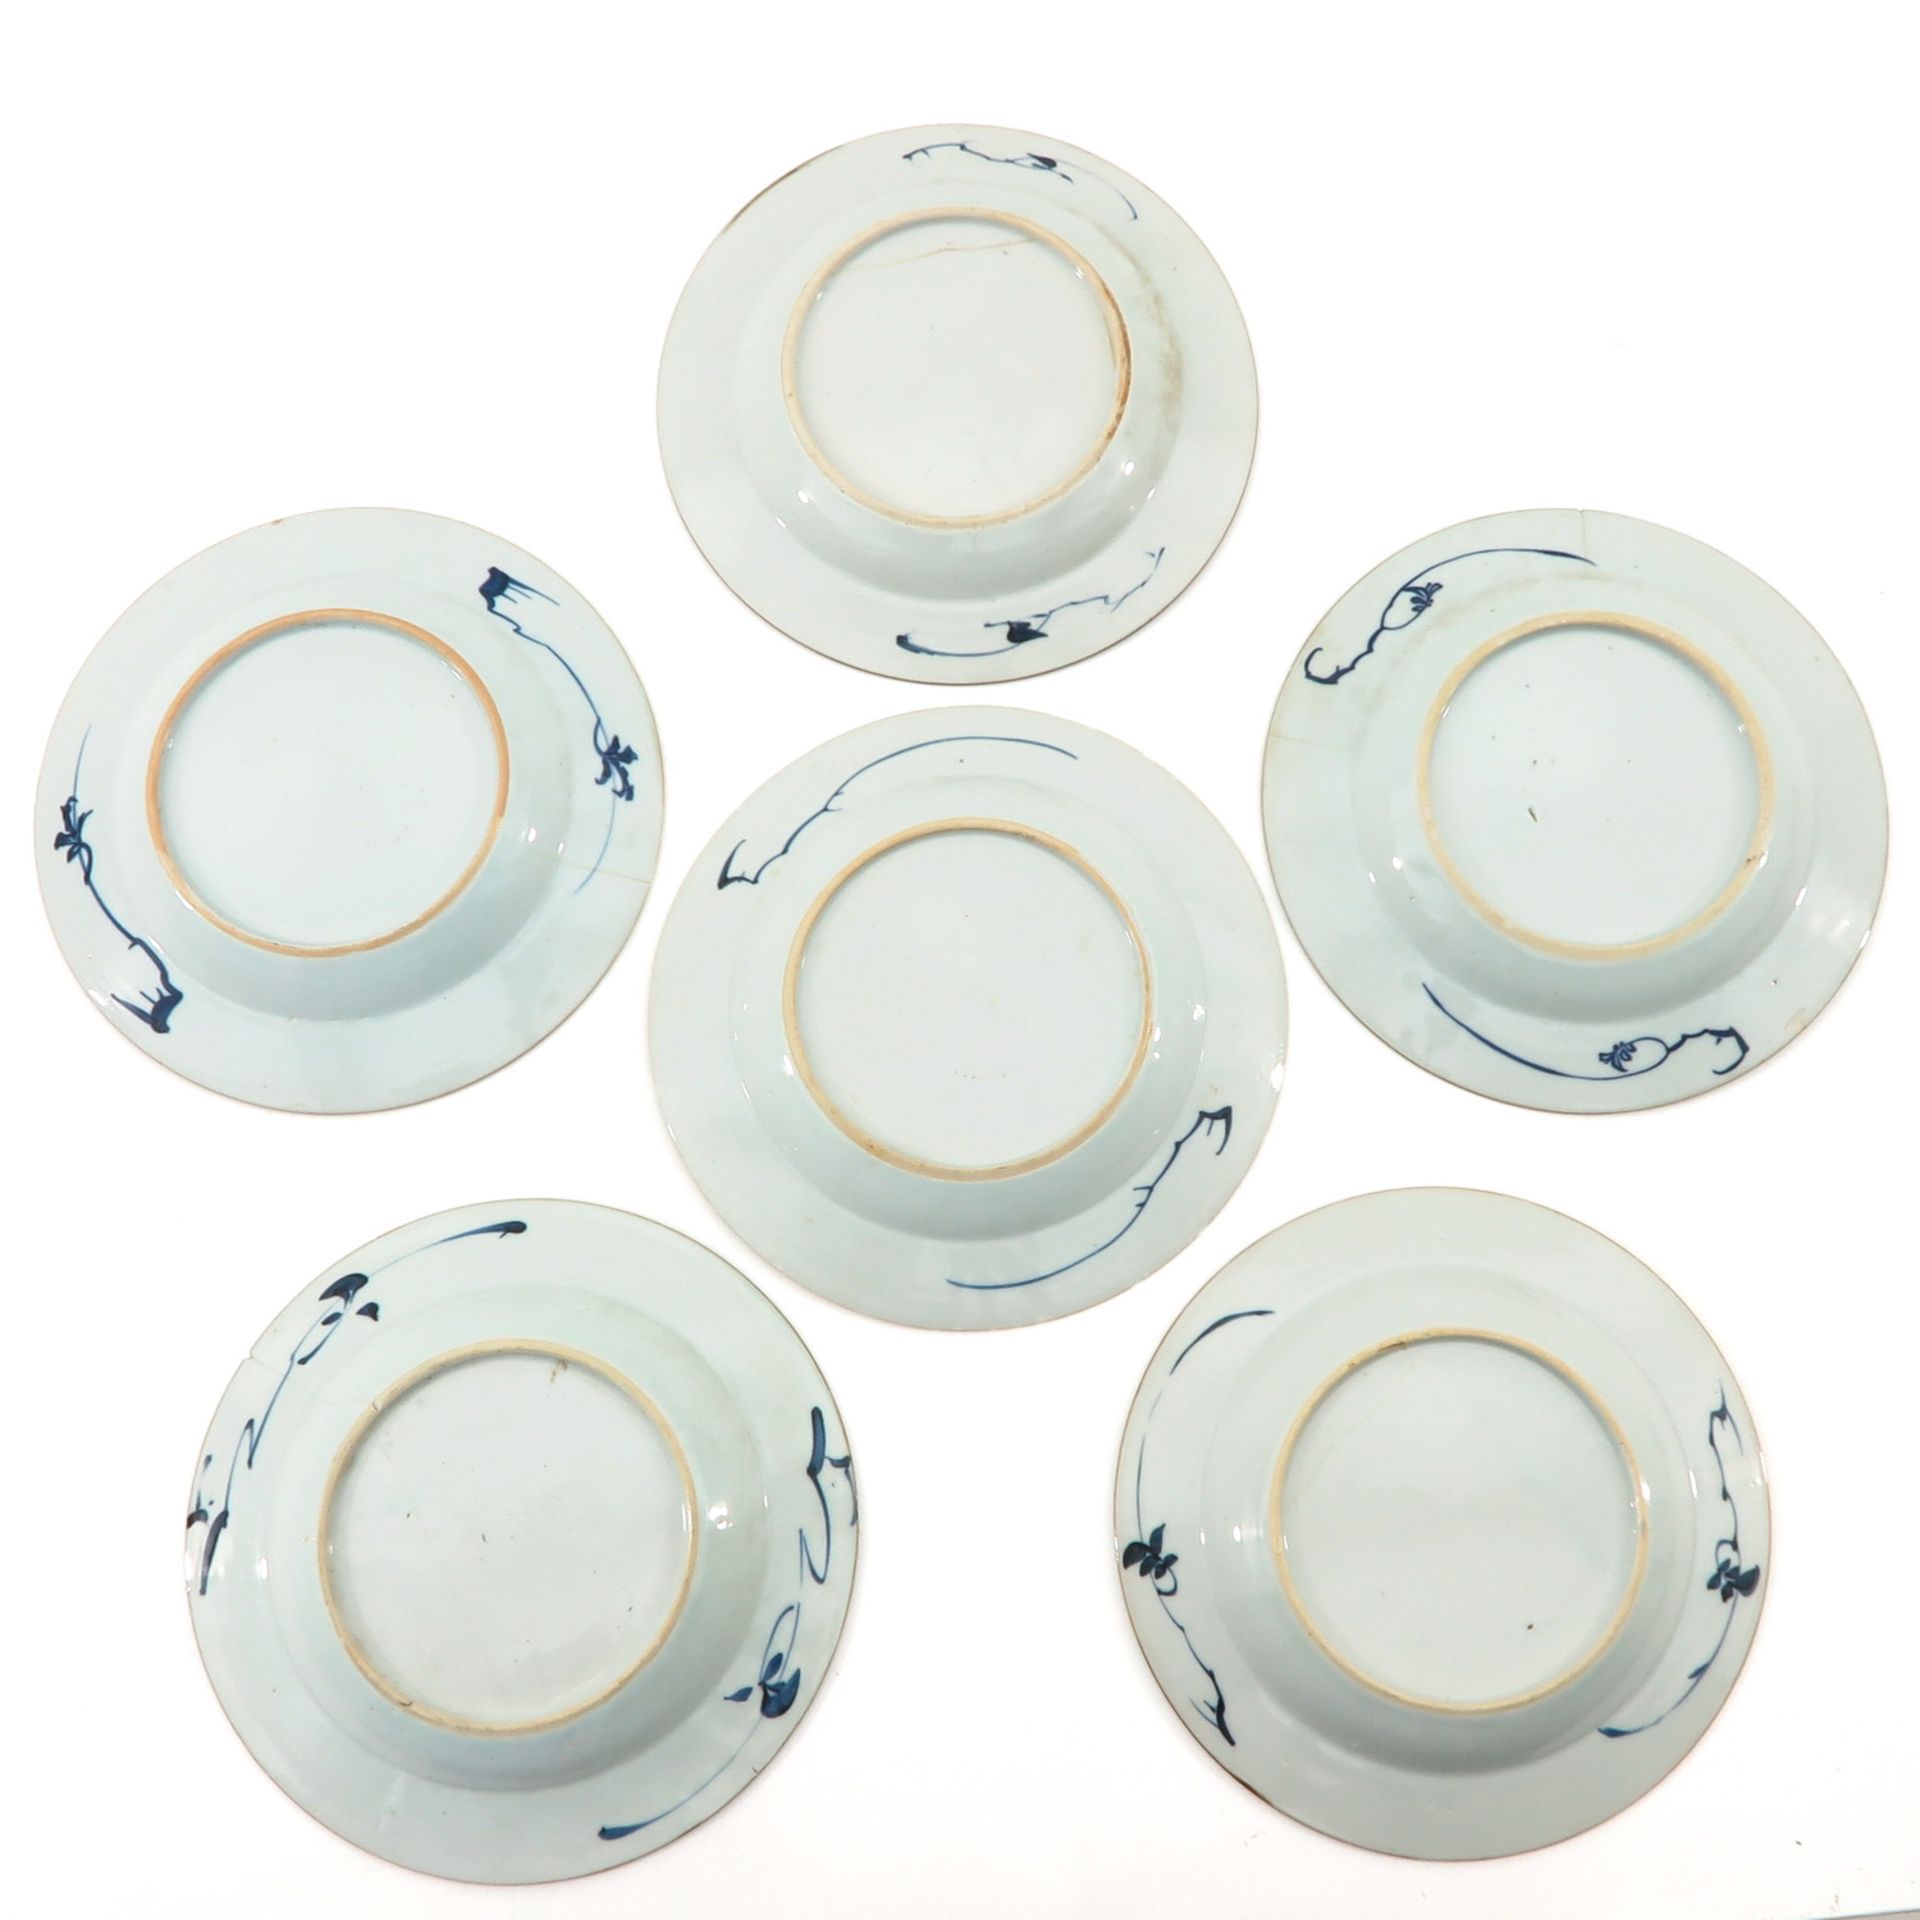 A Series of 6 Blue and White Plates - Image 2 of 10